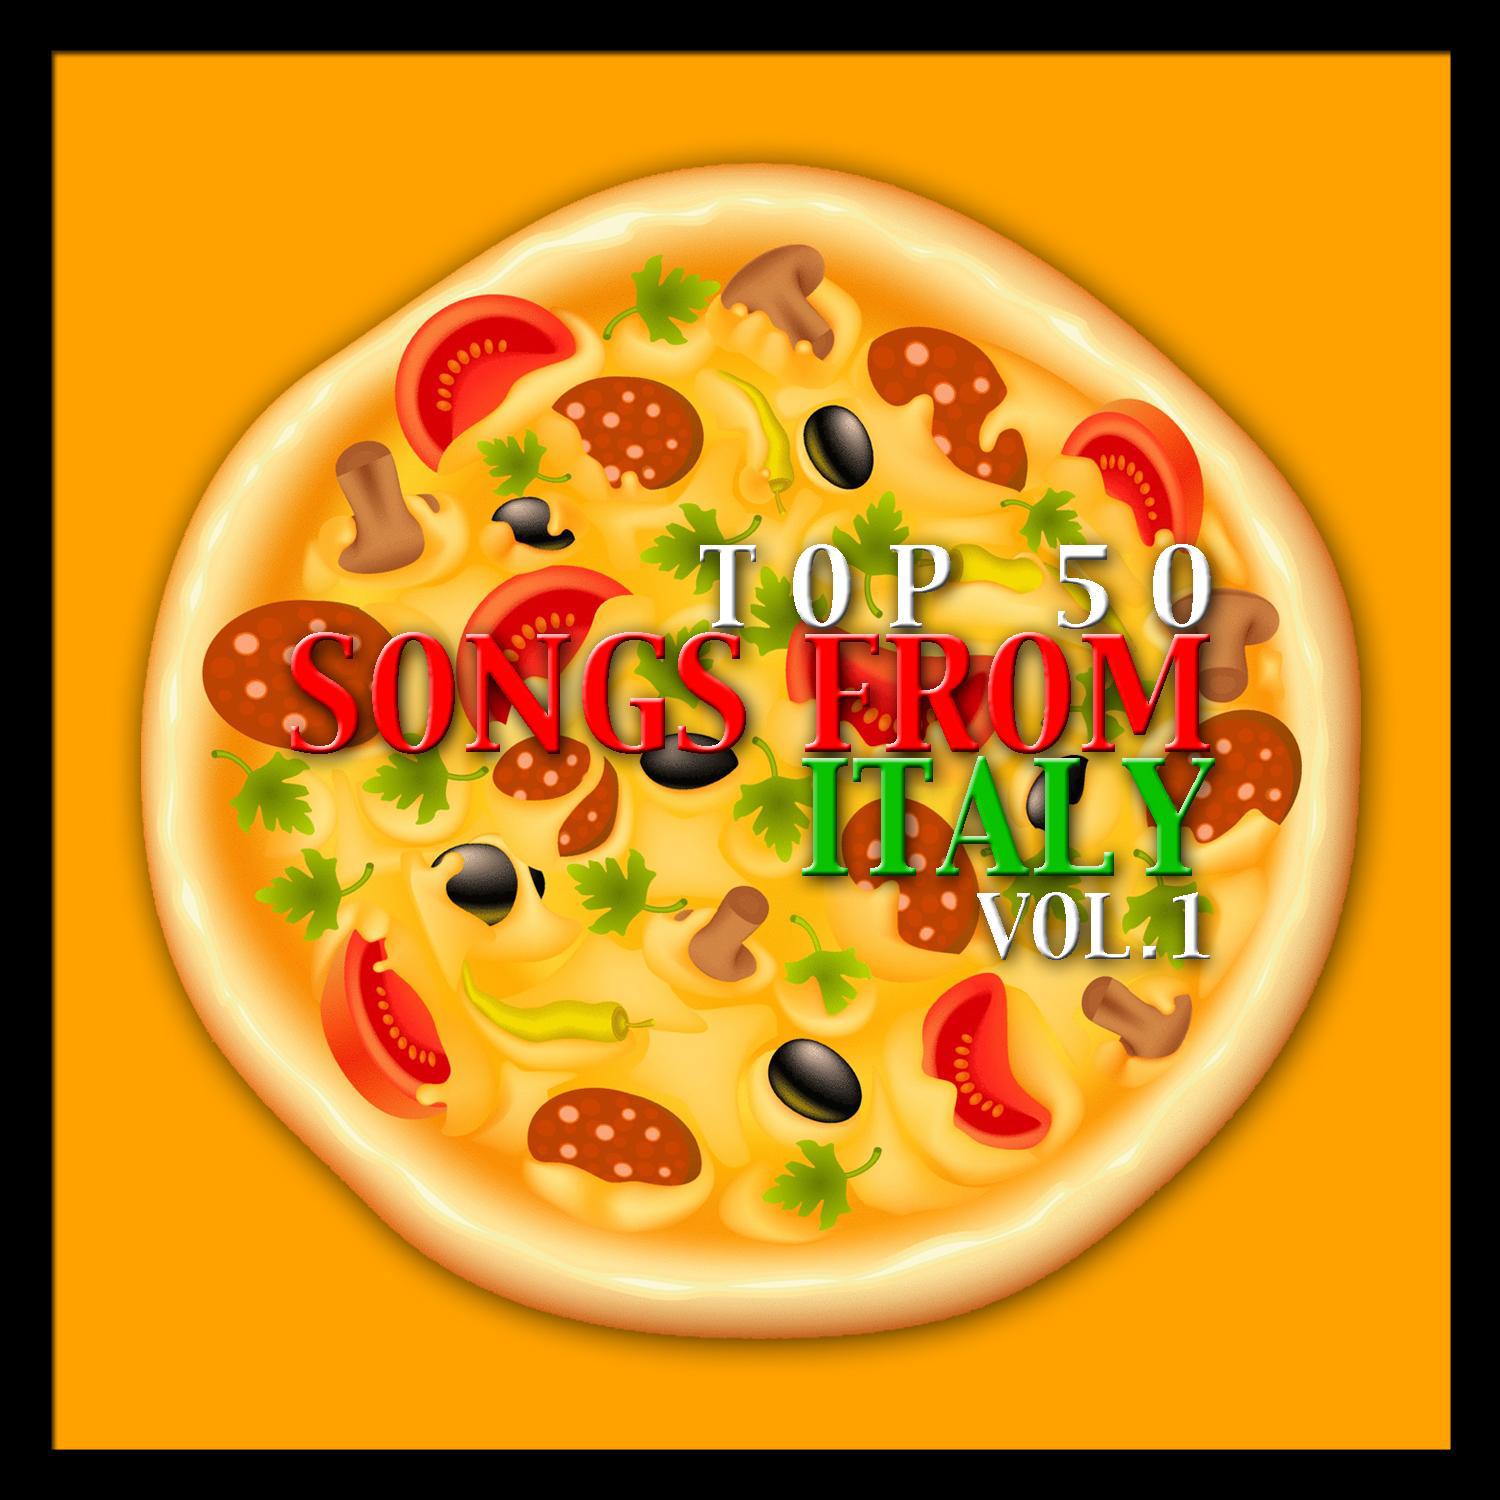 Top 50 Songs from Italy Vol. 1